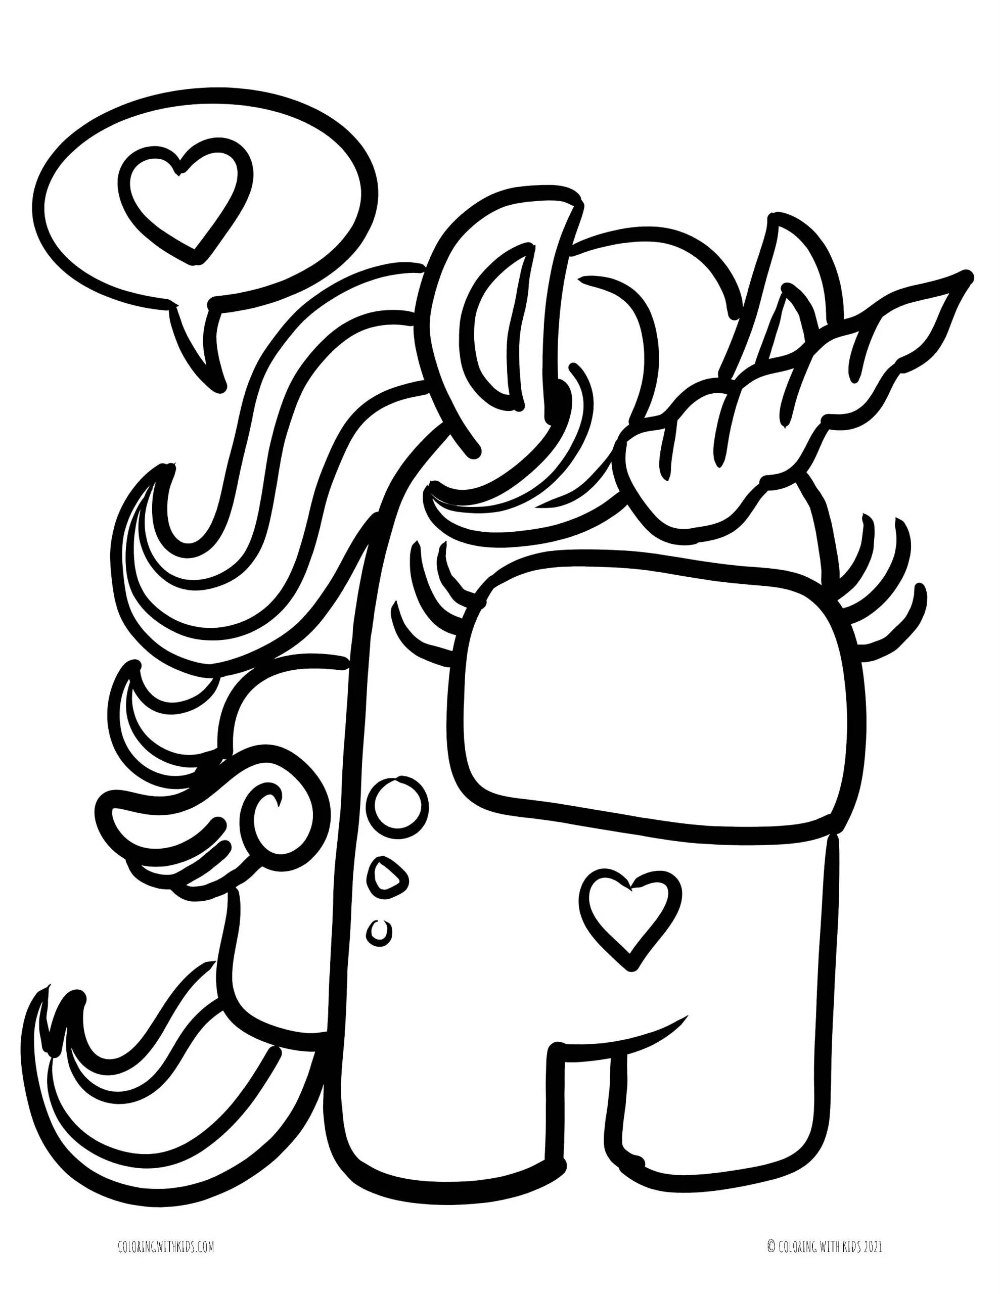 Among Us Coloring Pages - Coloring with Kids | Licorne à colorier,  Coloriage, Licorne coloriage